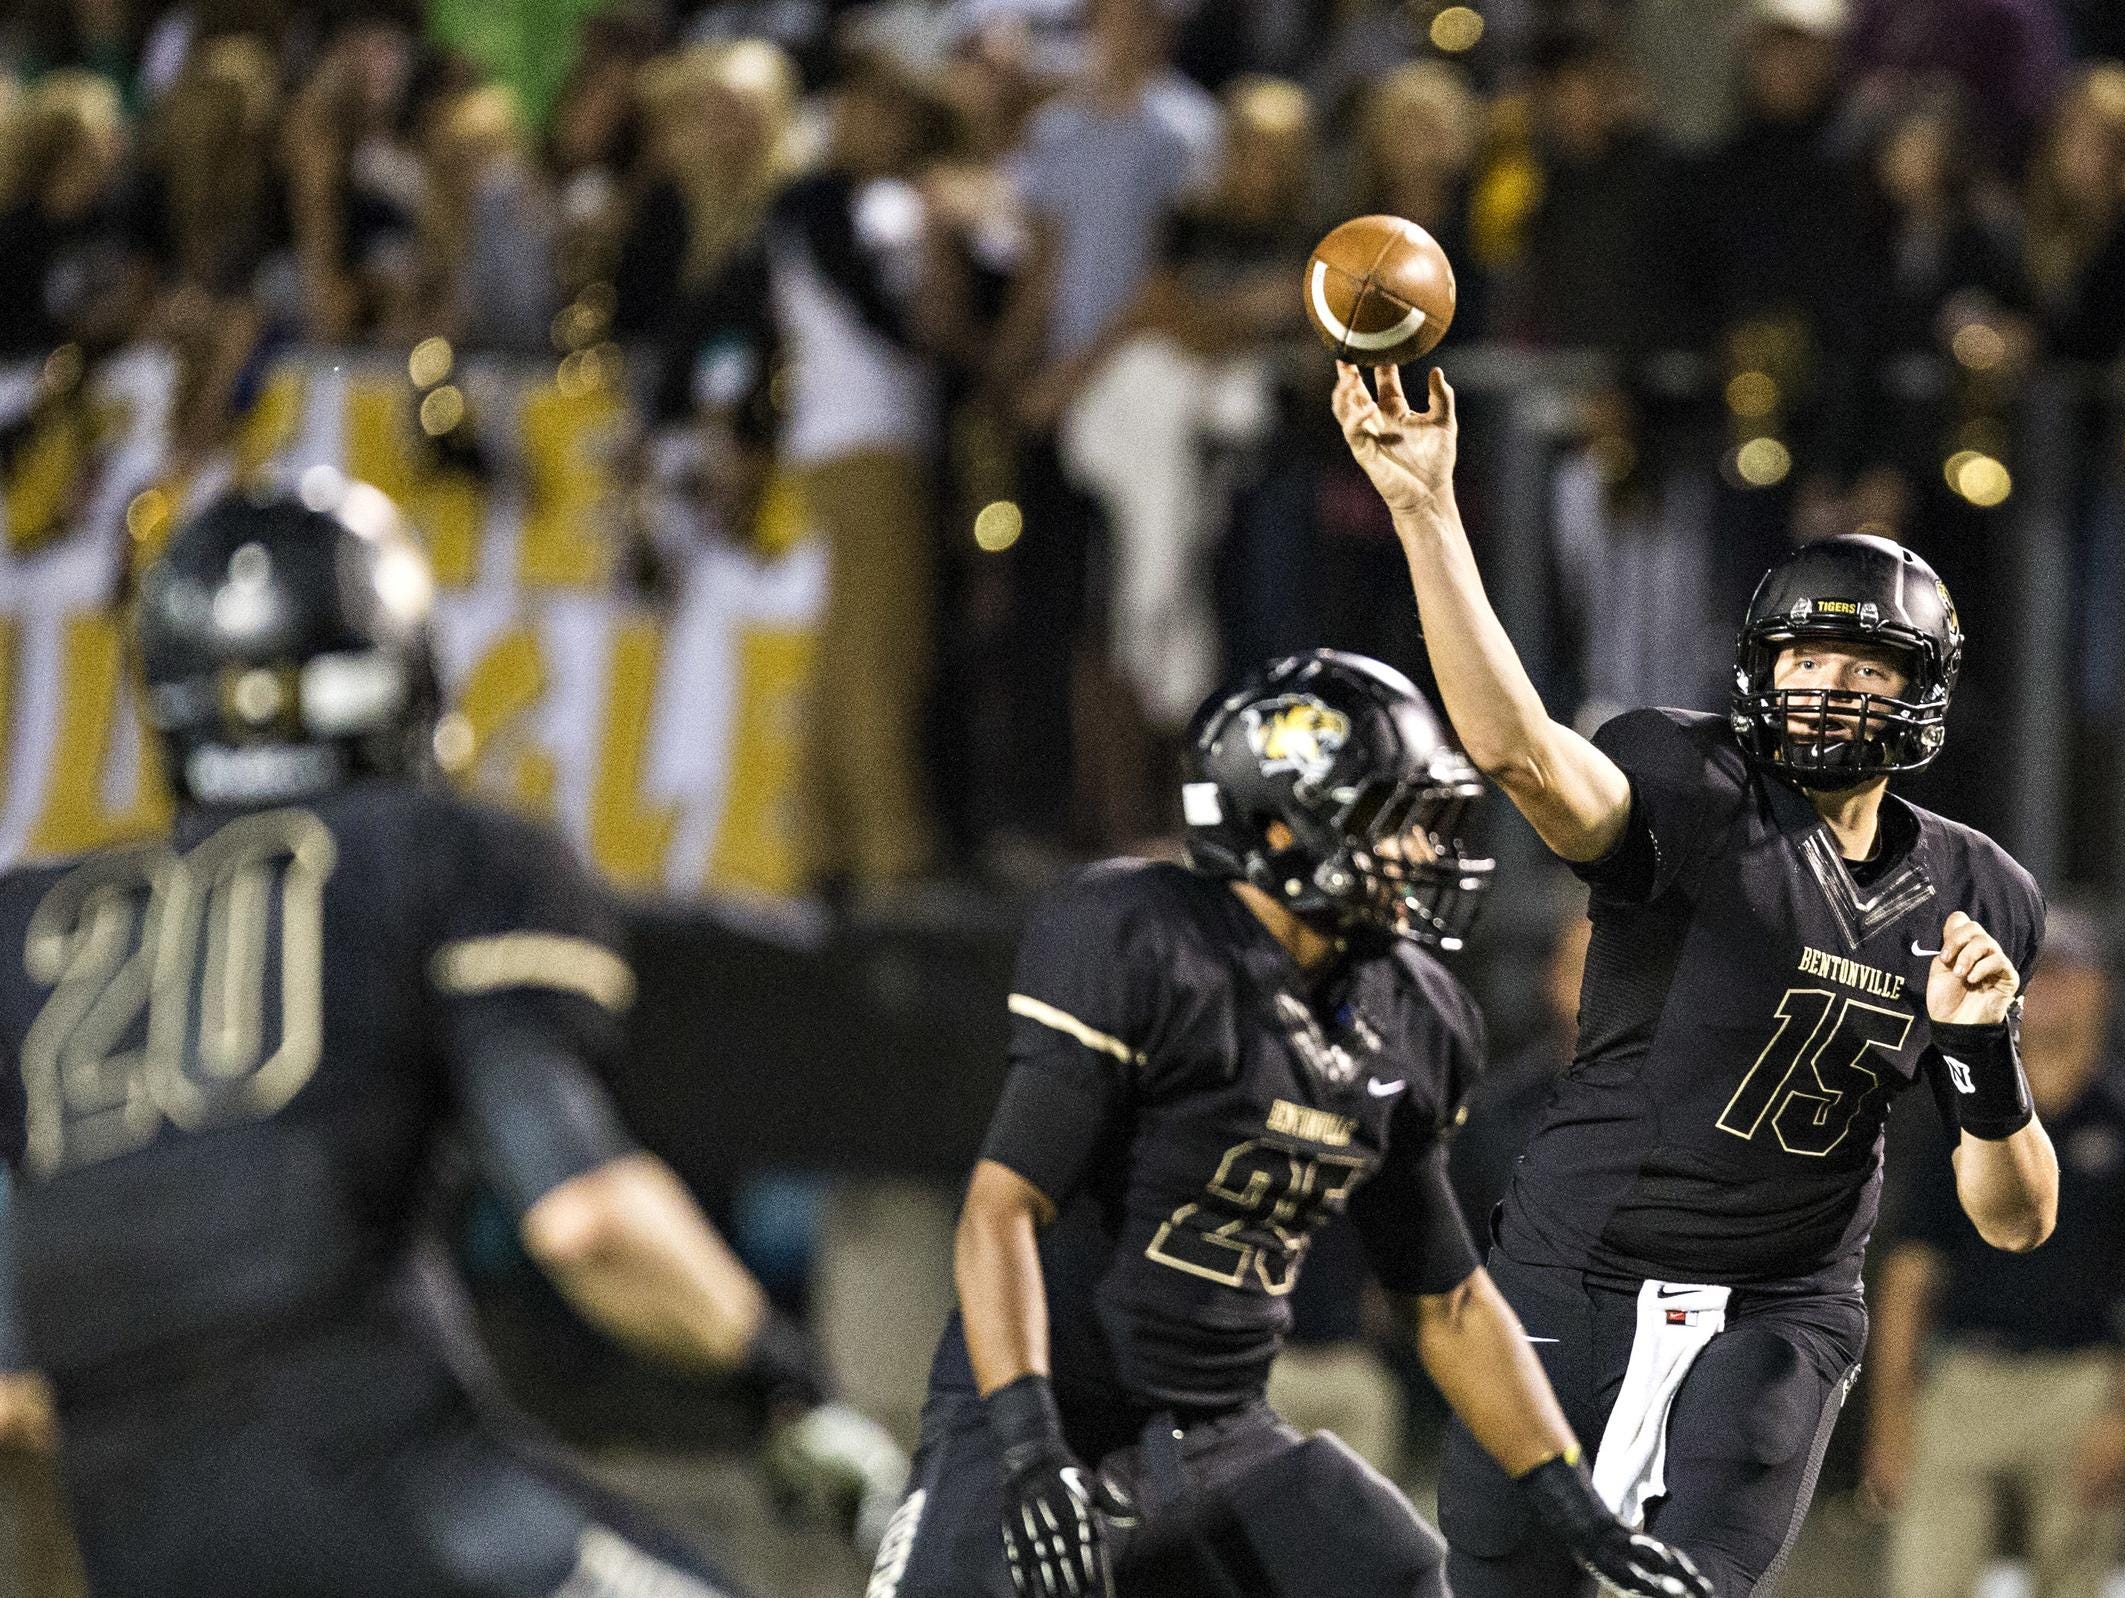 Bentonville High quarterback Kasey Ford makes a throw during a 2013 game. Ford is now an experienced player leading a 2-0 team with back-to-back state titles.